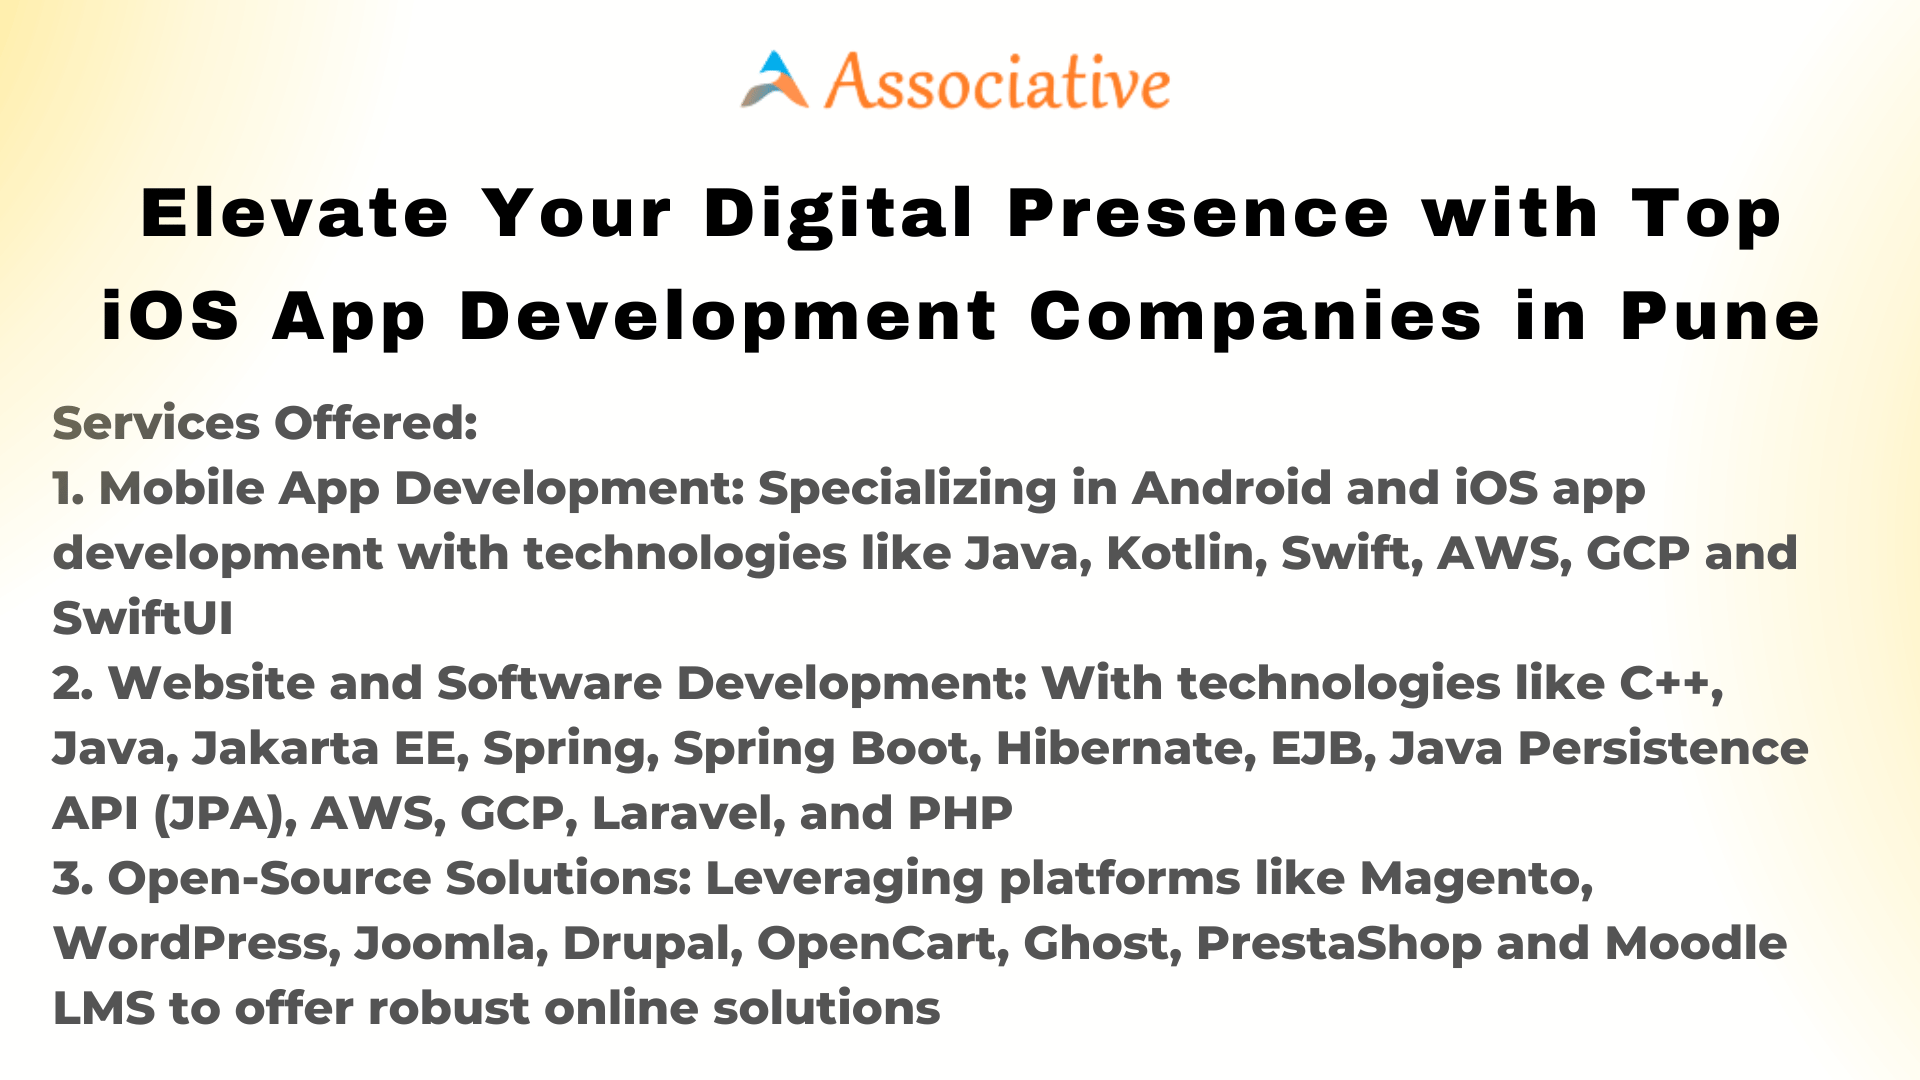 Elevate Your Digital Presence with Top iOS App Development Companies in Pune